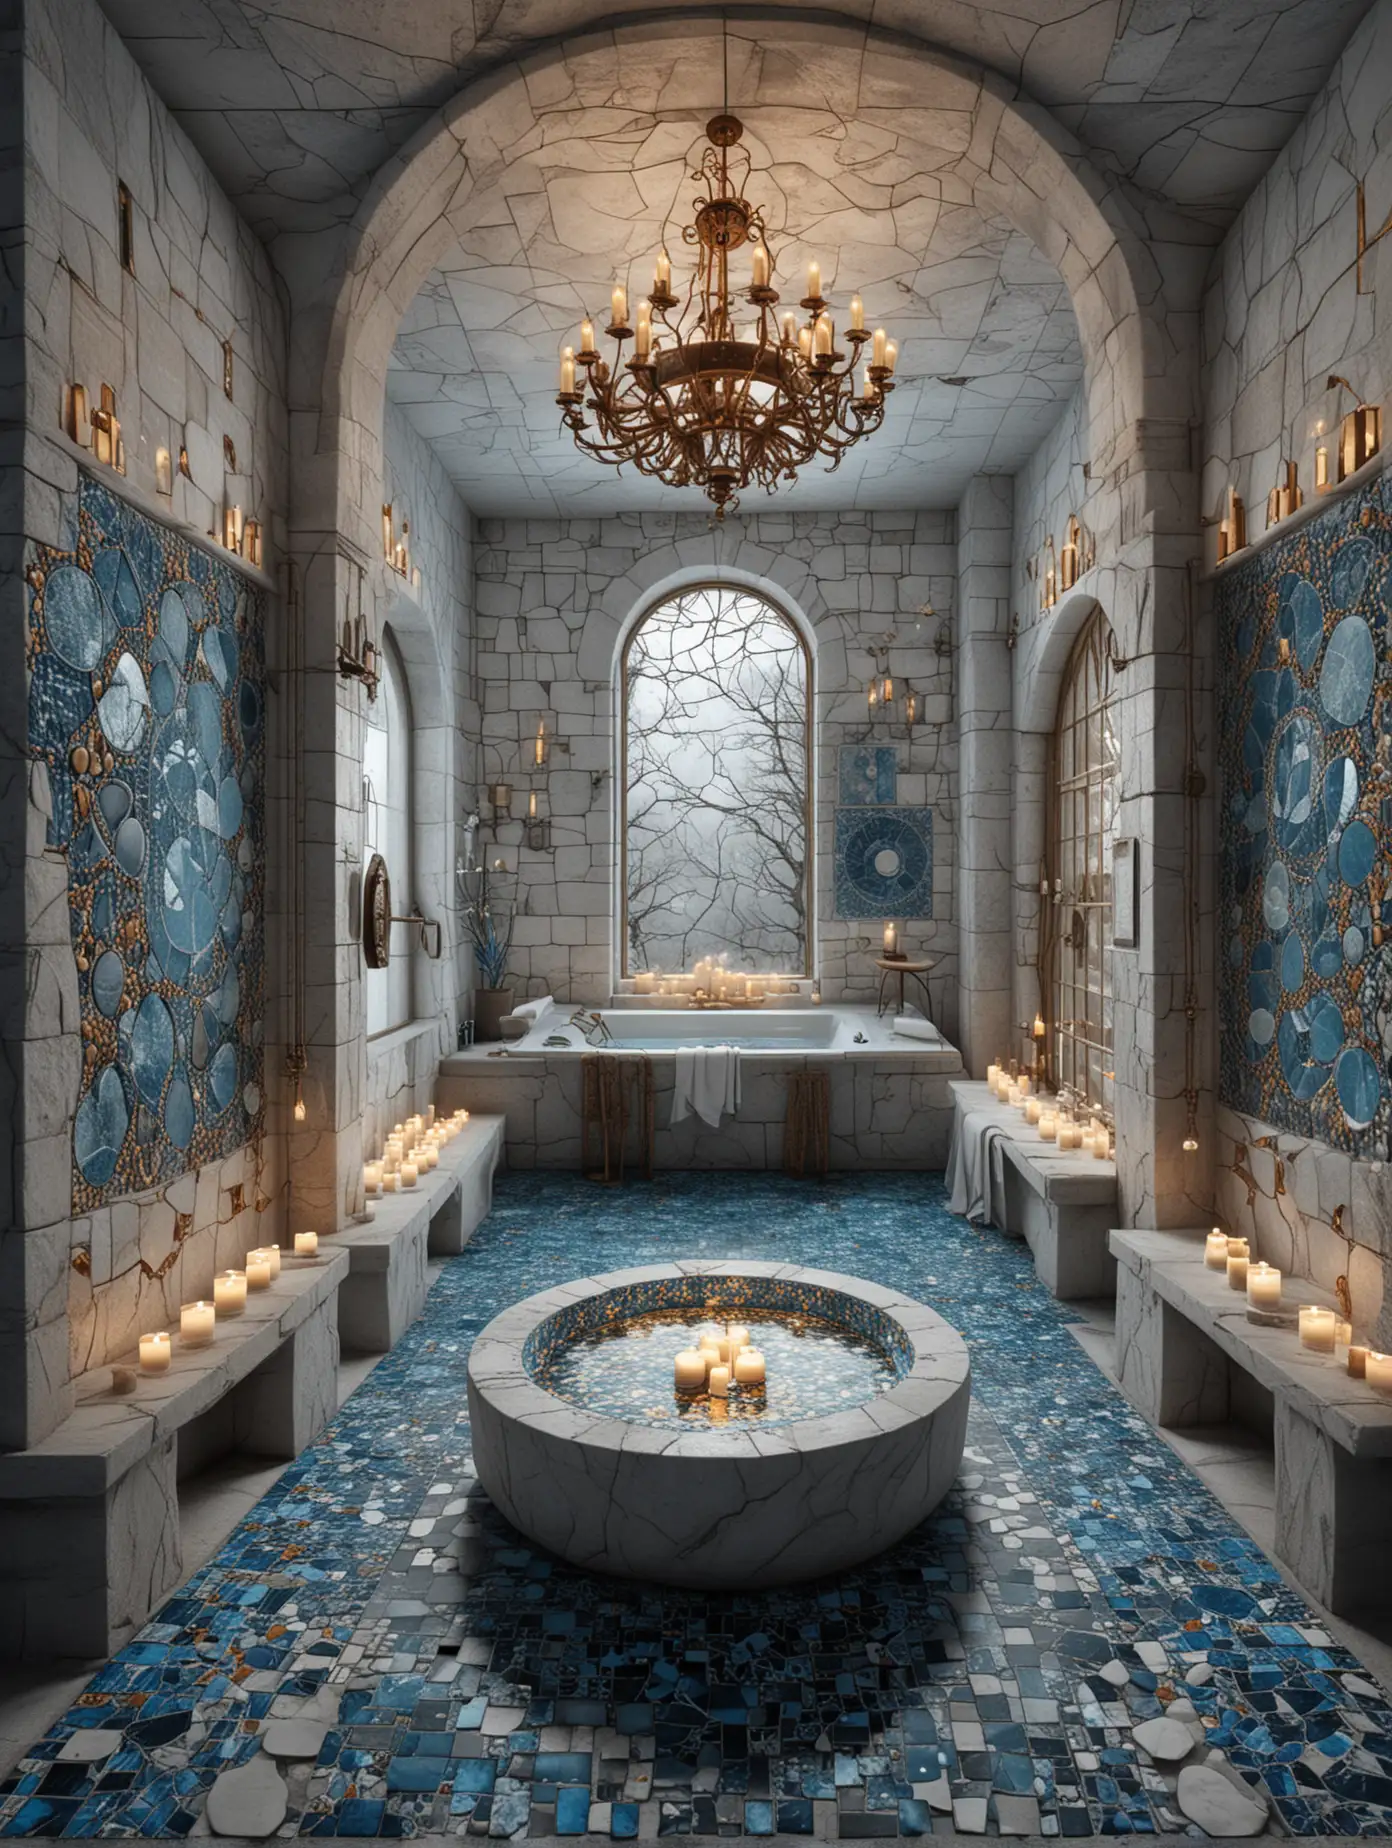 | A very detailed white stone nordic spa and laboratory  : 1.
| a very detailed bronze clock : 1.
| a mosaic floor with colorful fractal patterns : 1.
| carved walls in white stone with blue and dark with symbols in viking style  : .8
| lit candles :  1.
| clear,dark nordic atmosphere : 1.
| highly detailed,high precision,focus on textures, hyperrealistic,bright : 1.